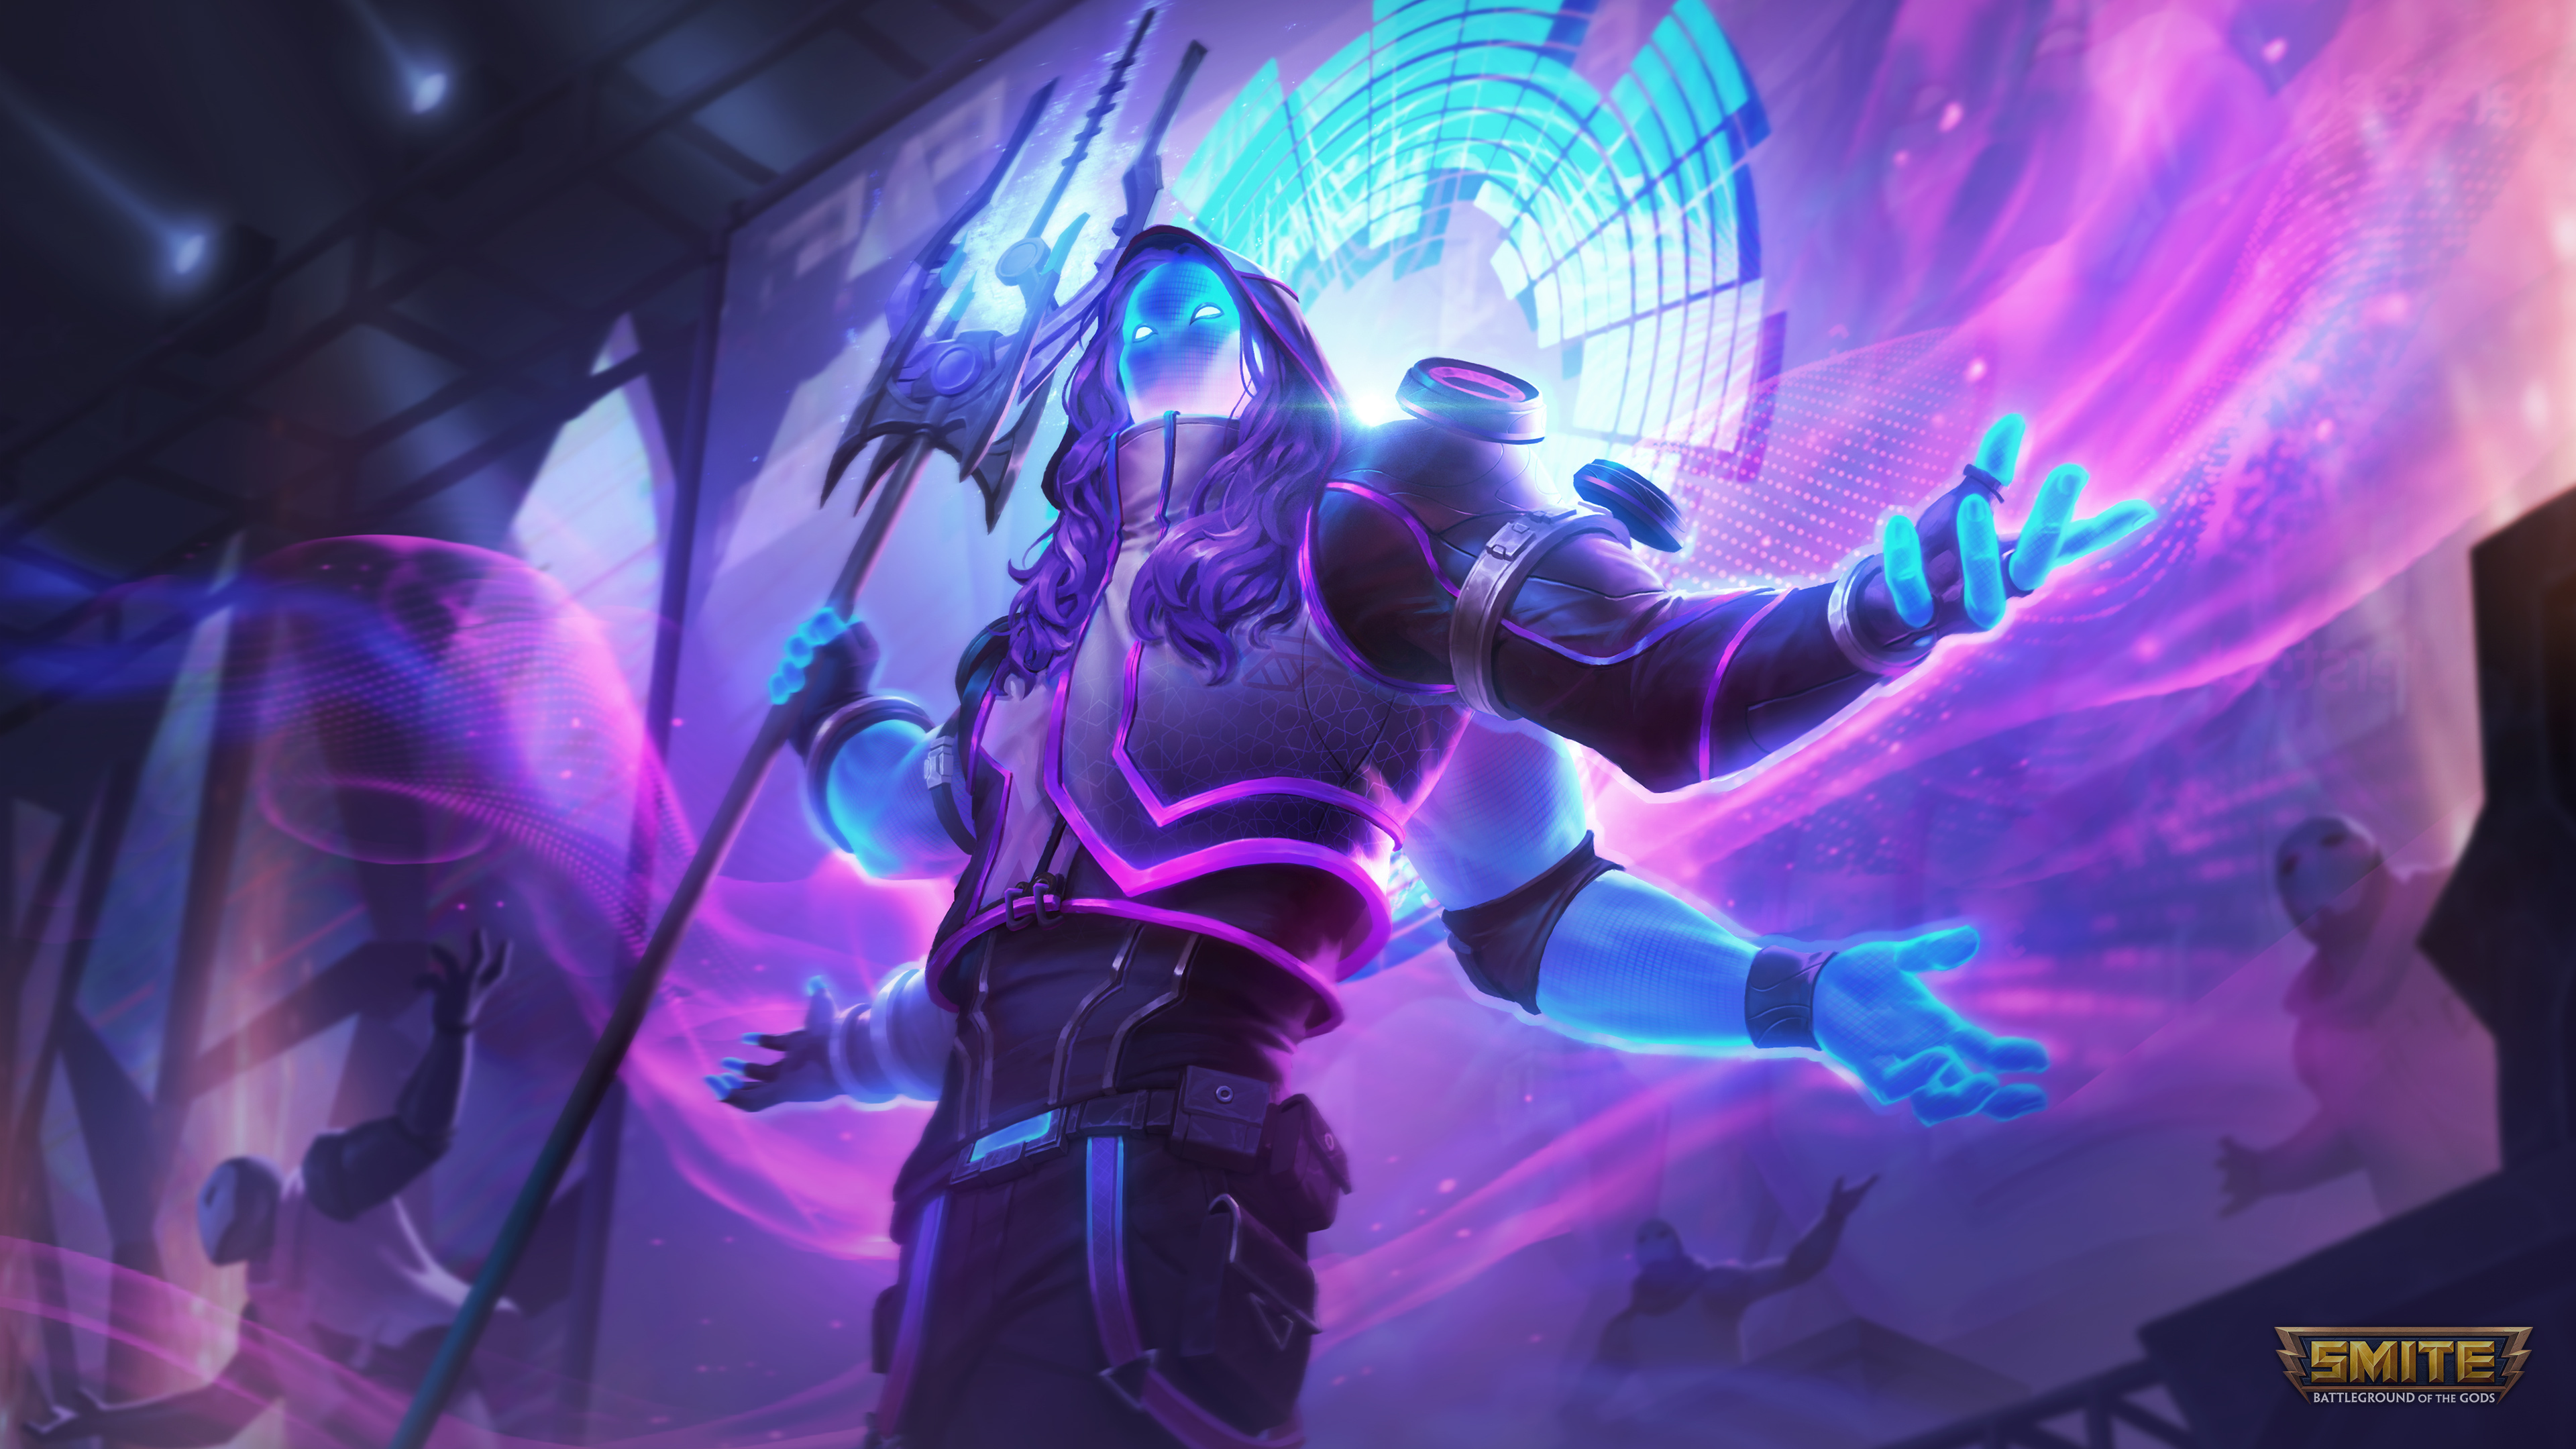 Shiva (Smite) HD Wallpapers and Backgrounds